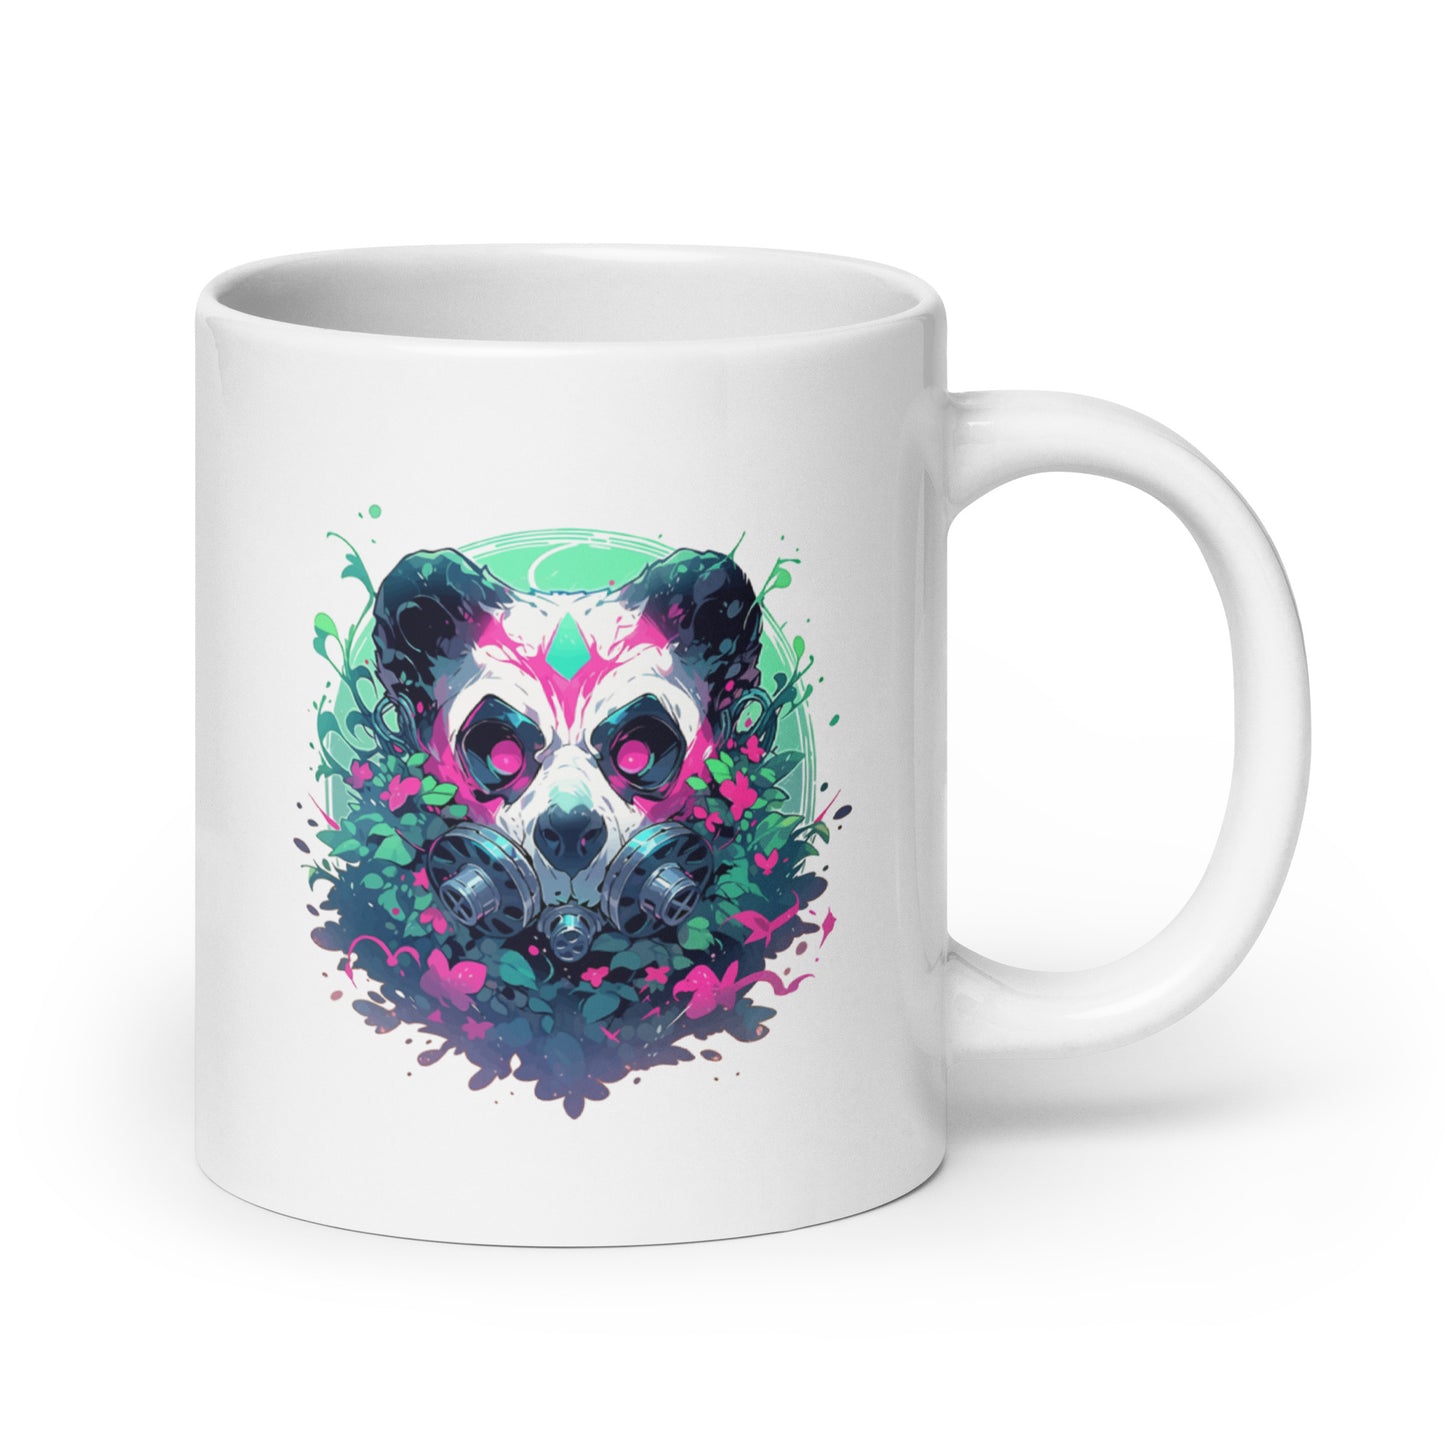 Cool toxic panda, Post-apocalyptic jungle, Wild animal with pink eyes, Bamboo bear in gas mask, Black and white bear - White glossy mug